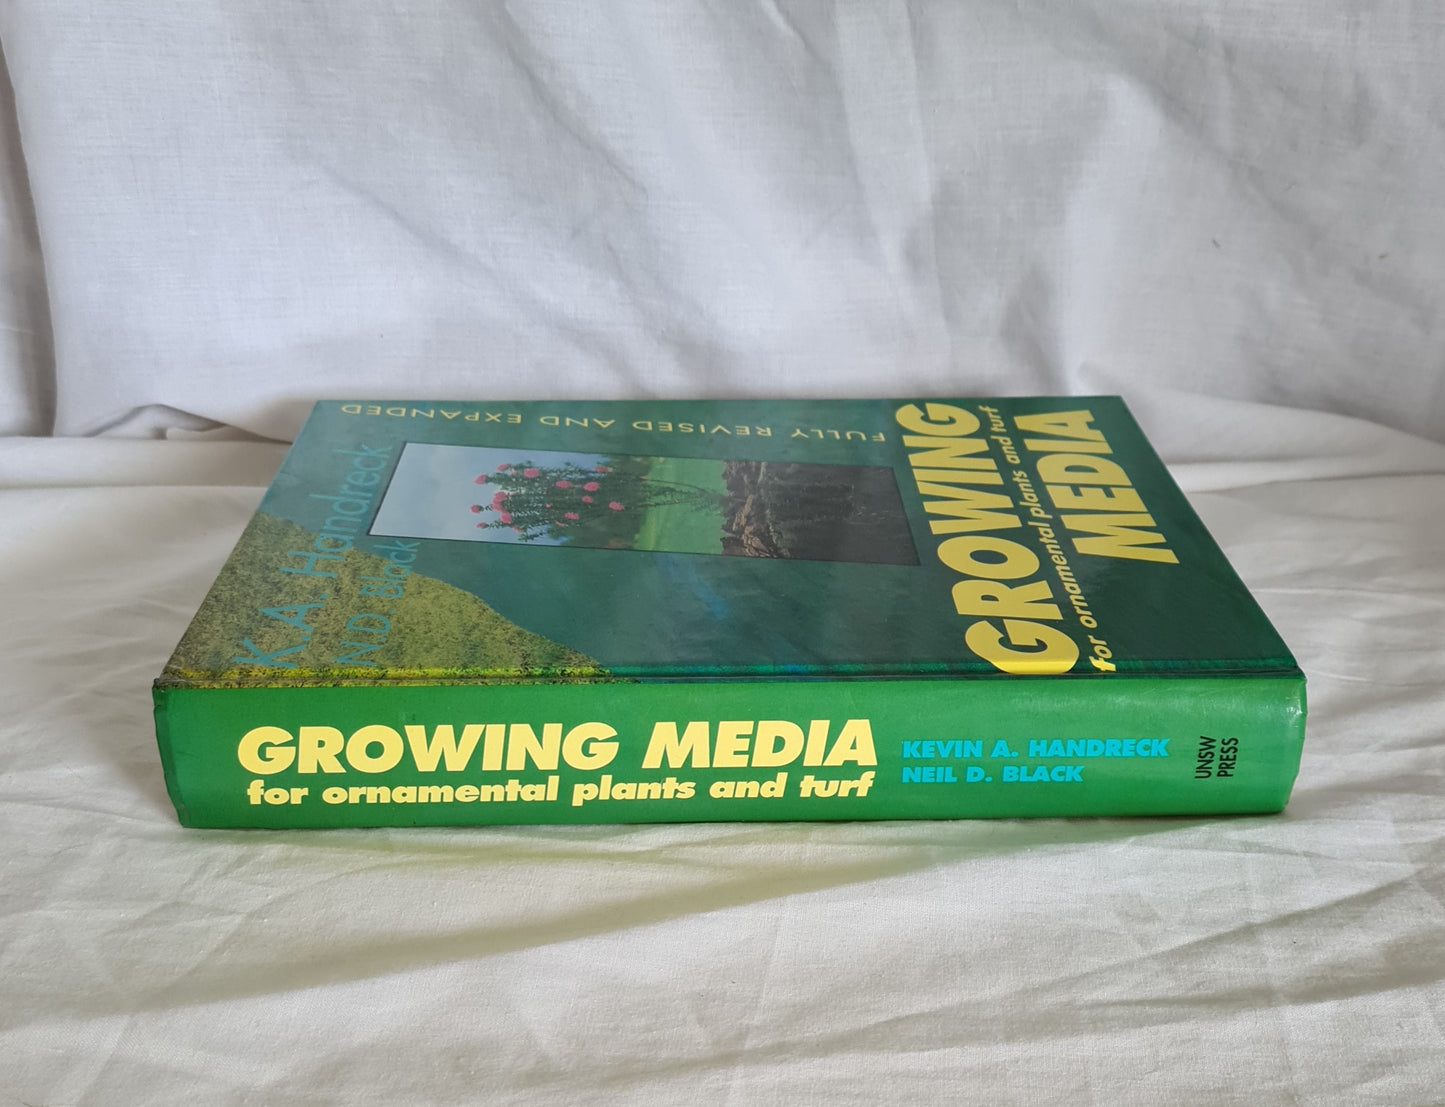 Growing Media by K. A. Handreck and N. D. Black